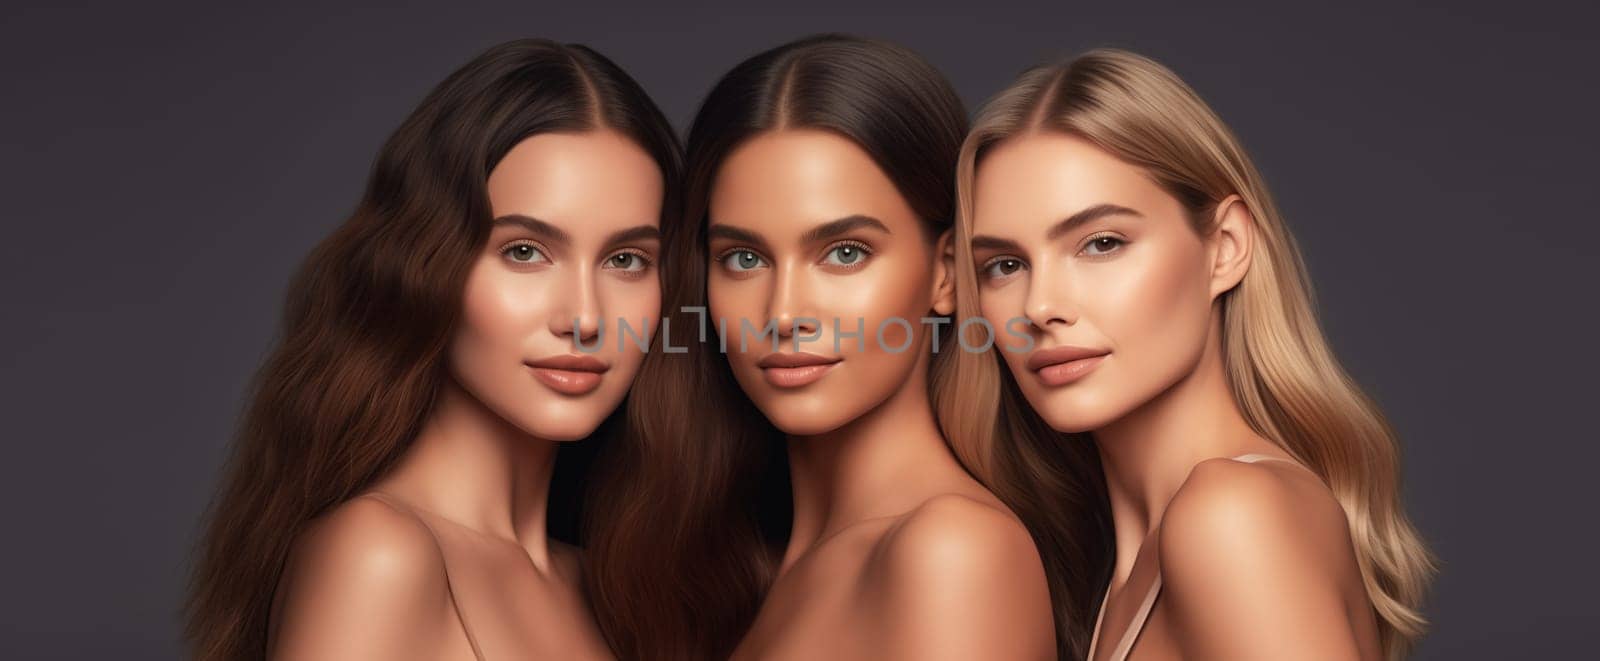 Beauty portrait of three diverse young women with clean skin, beautiful female models together by Rohappy